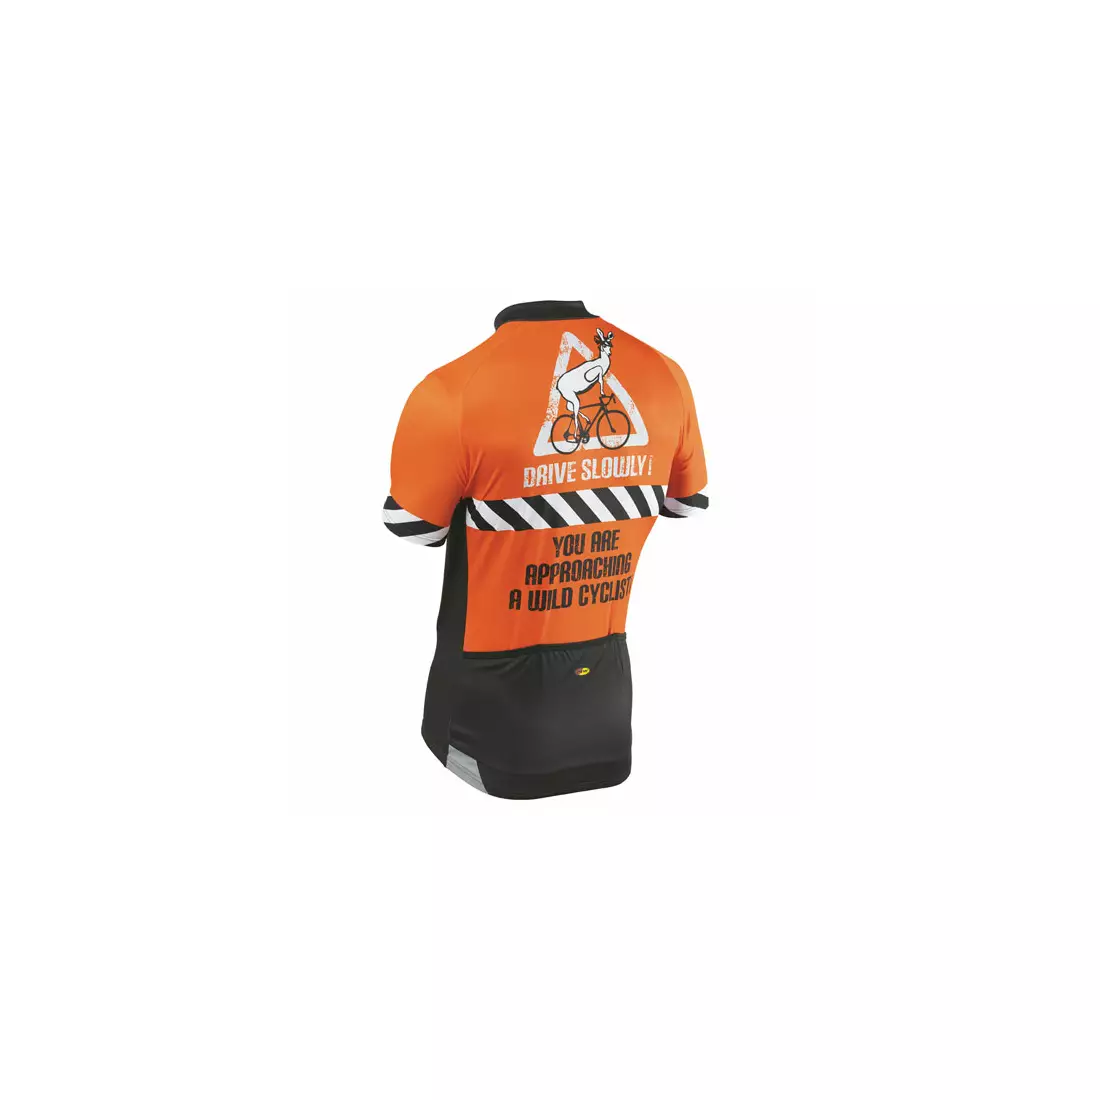 NORTHWAVE WILD CYCLIST men's cycling jersey